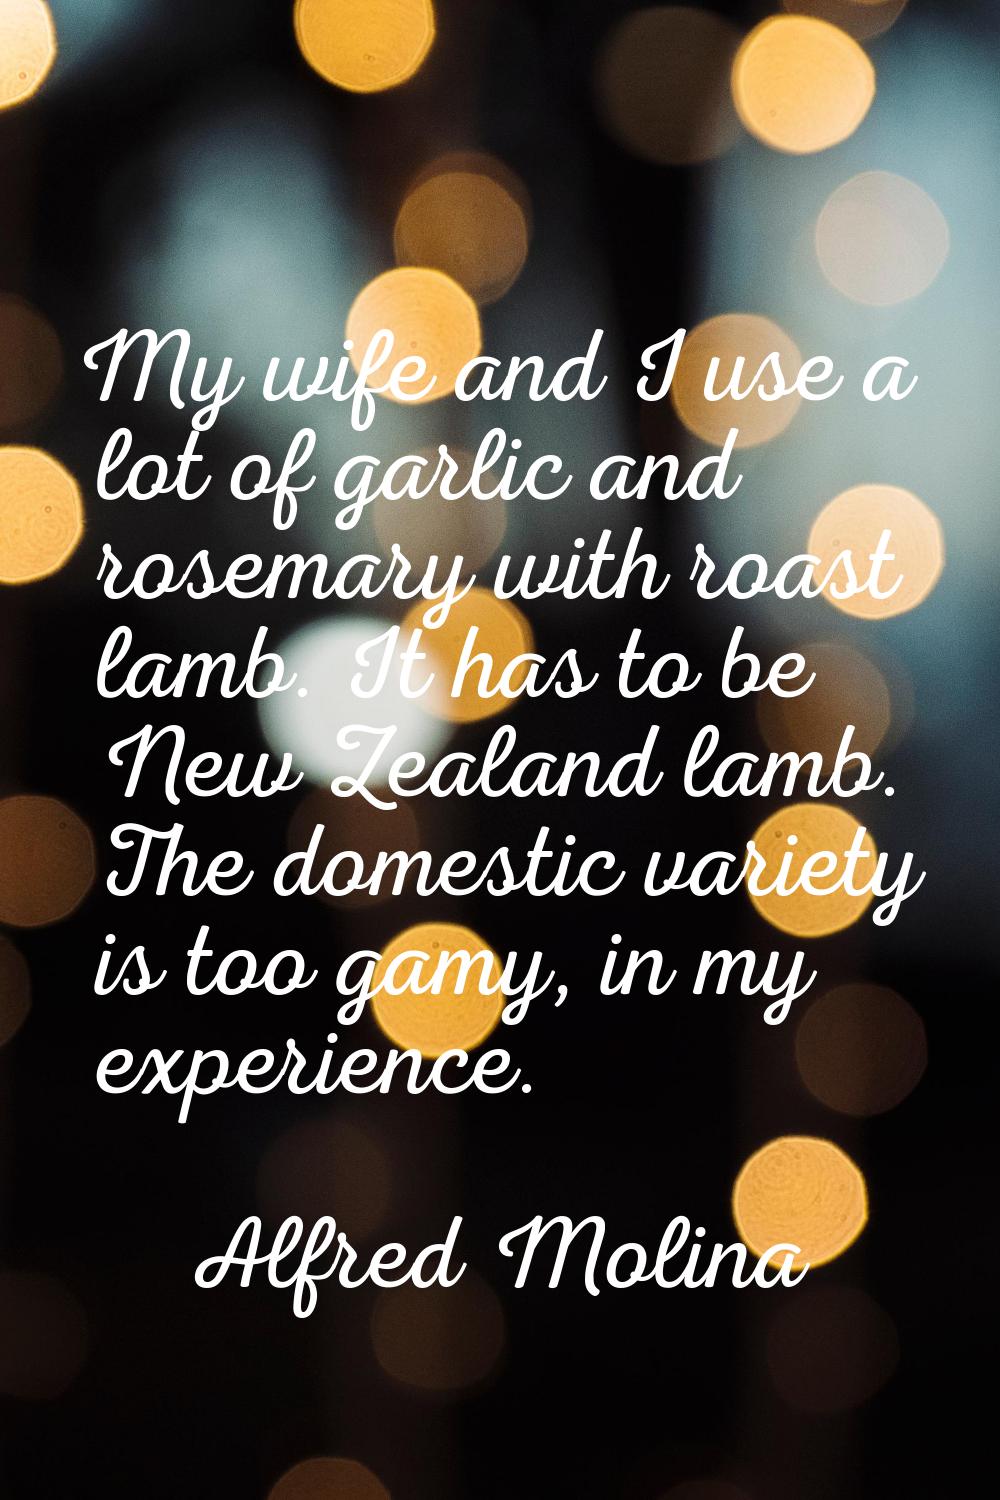 My wife and I use a lot of garlic and rosemary with roast lamb. It has to be New Zealand lamb. The 